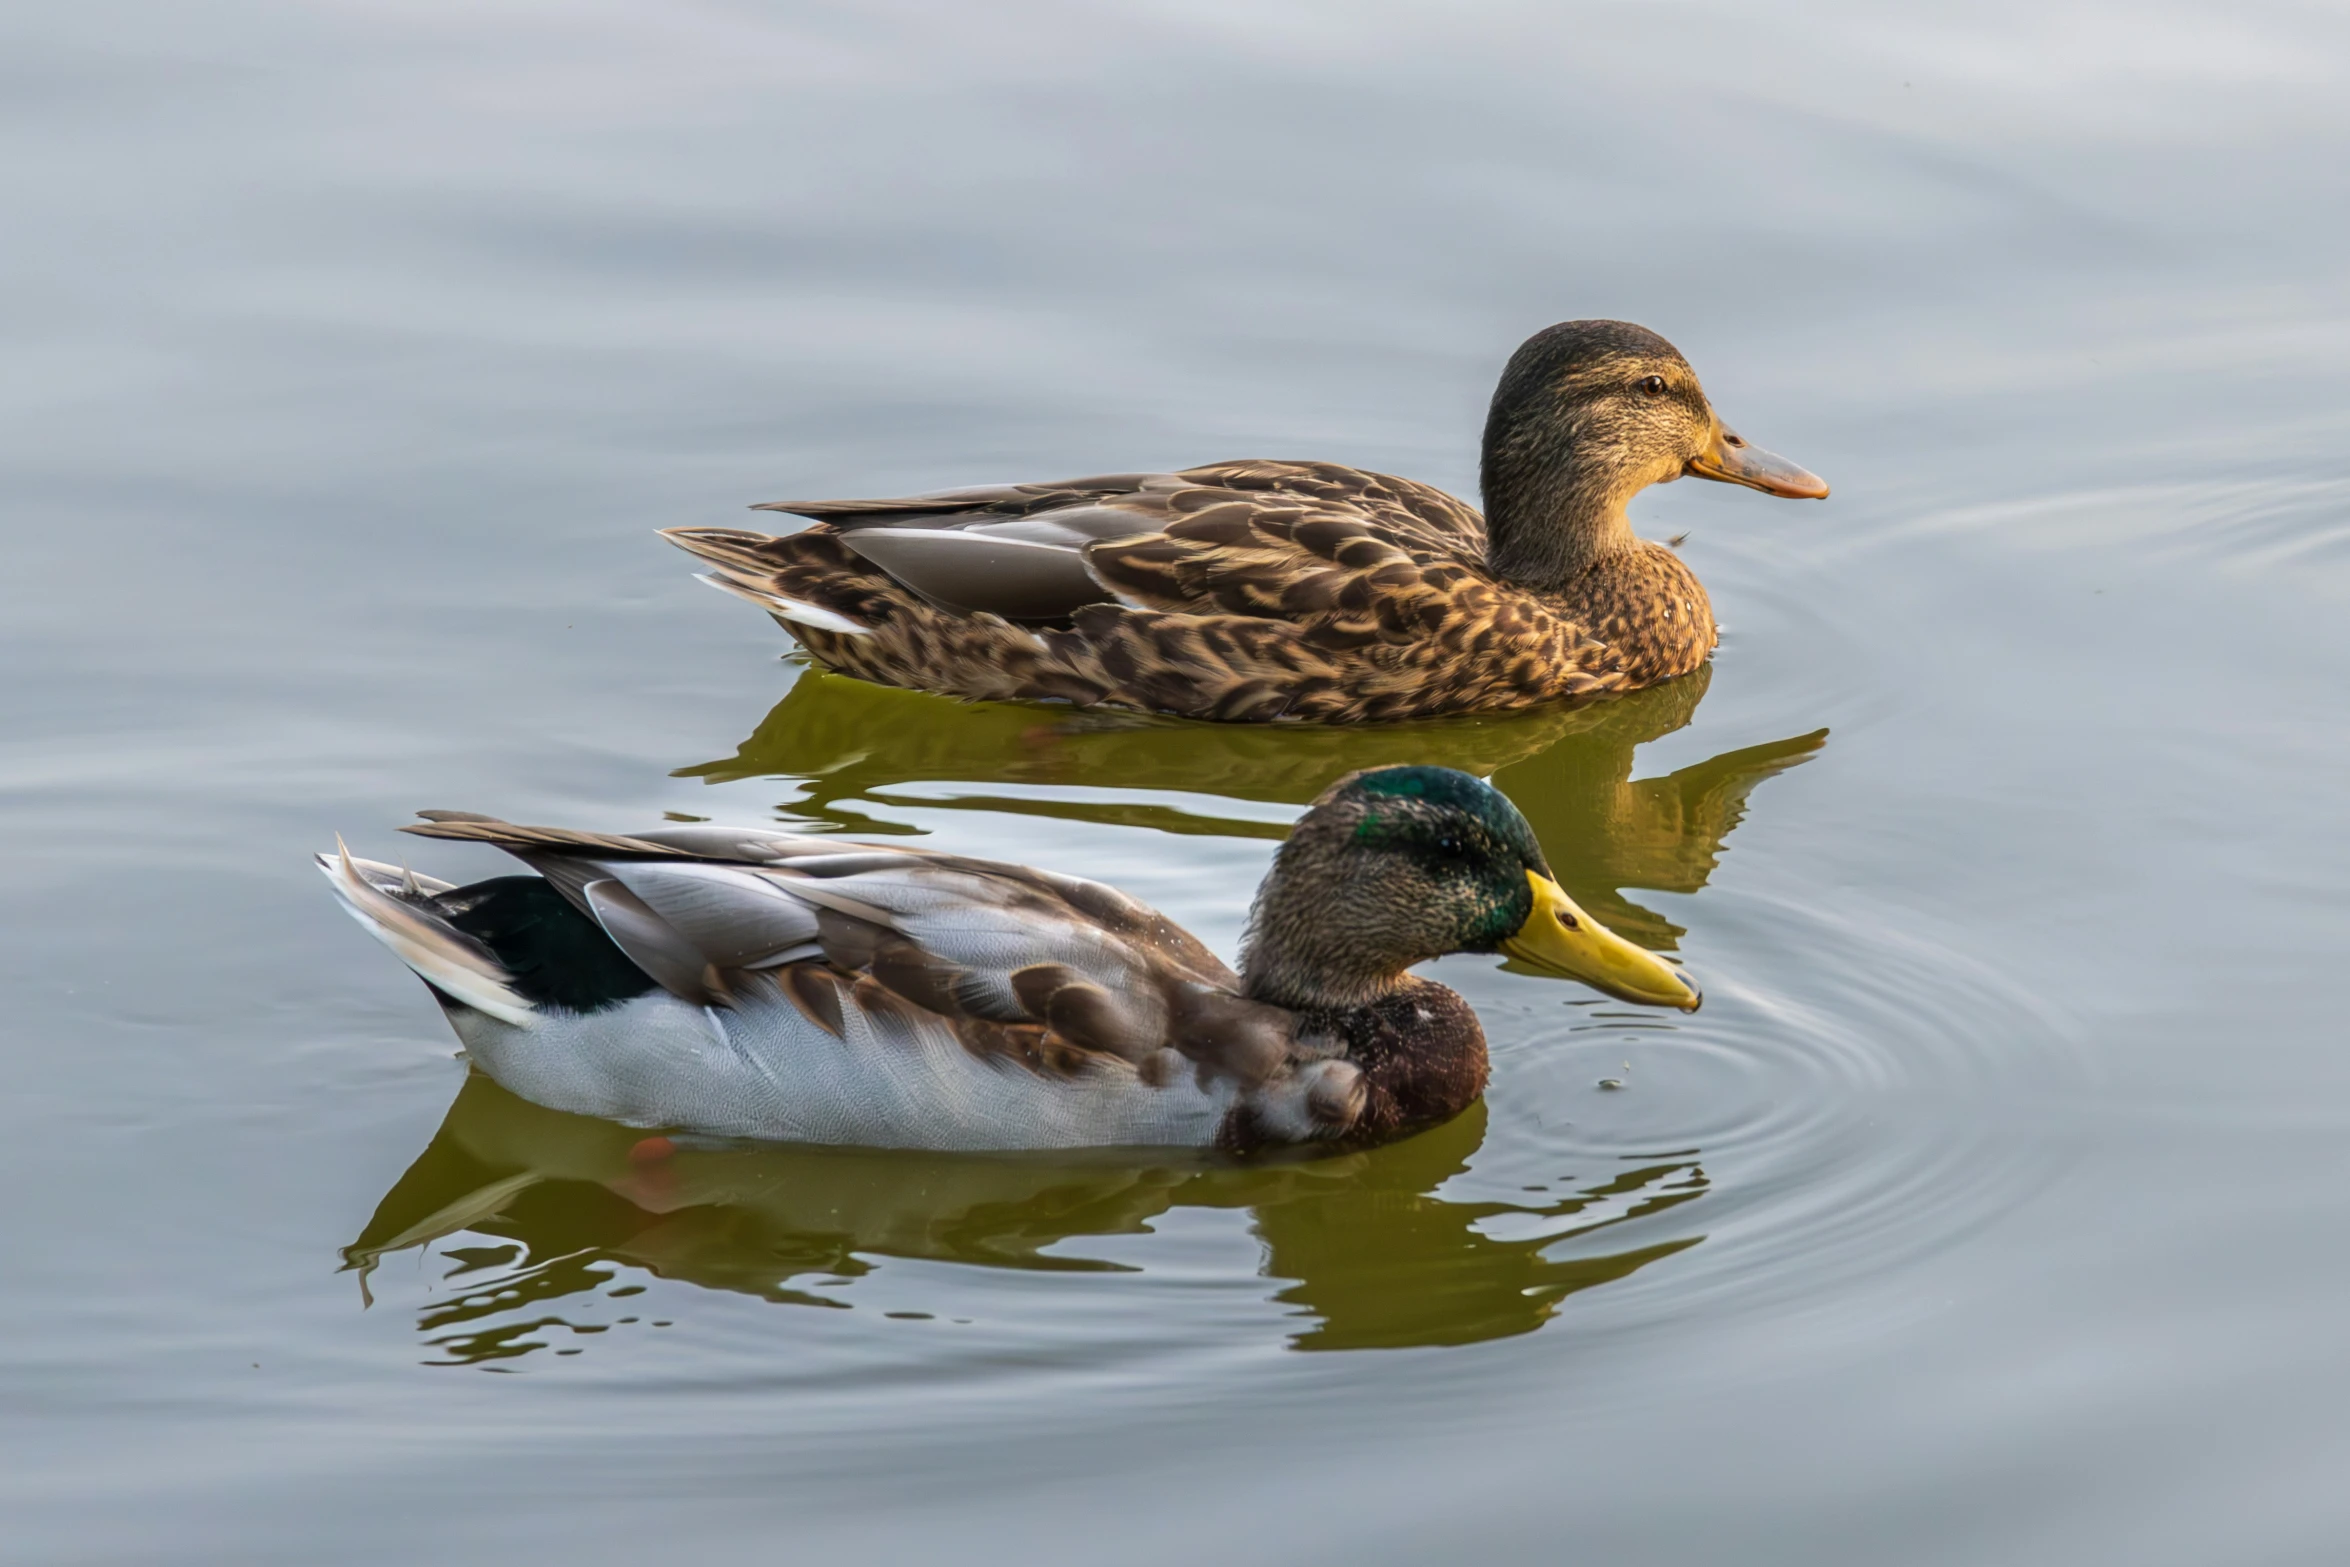 two ducks swimming in the calm water